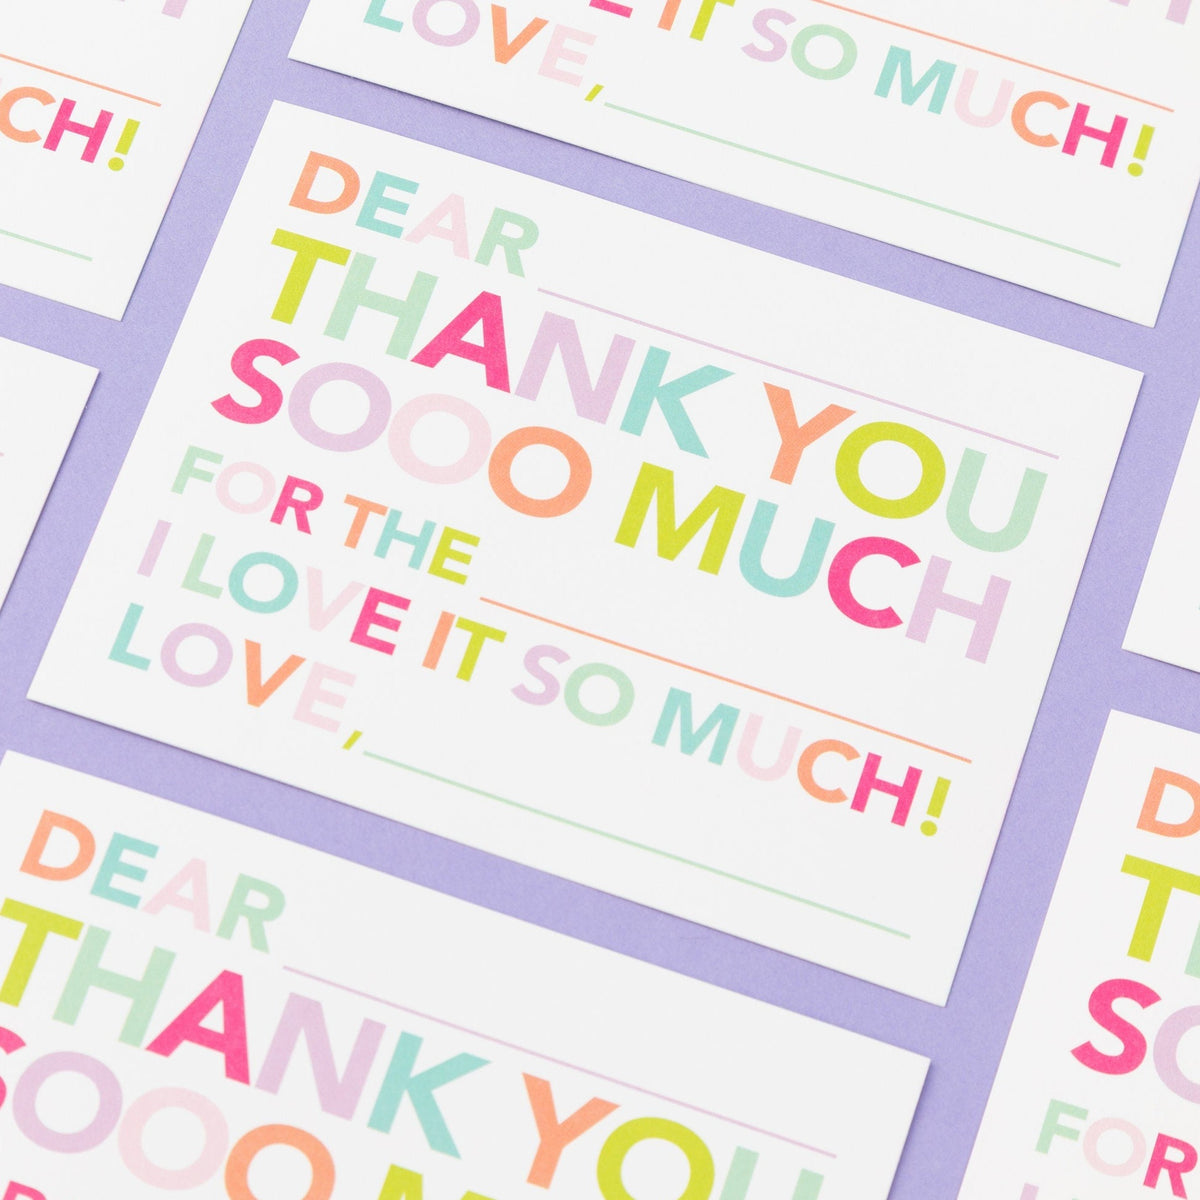 Thank You Notes for kids, Fill in the blank thank you notes